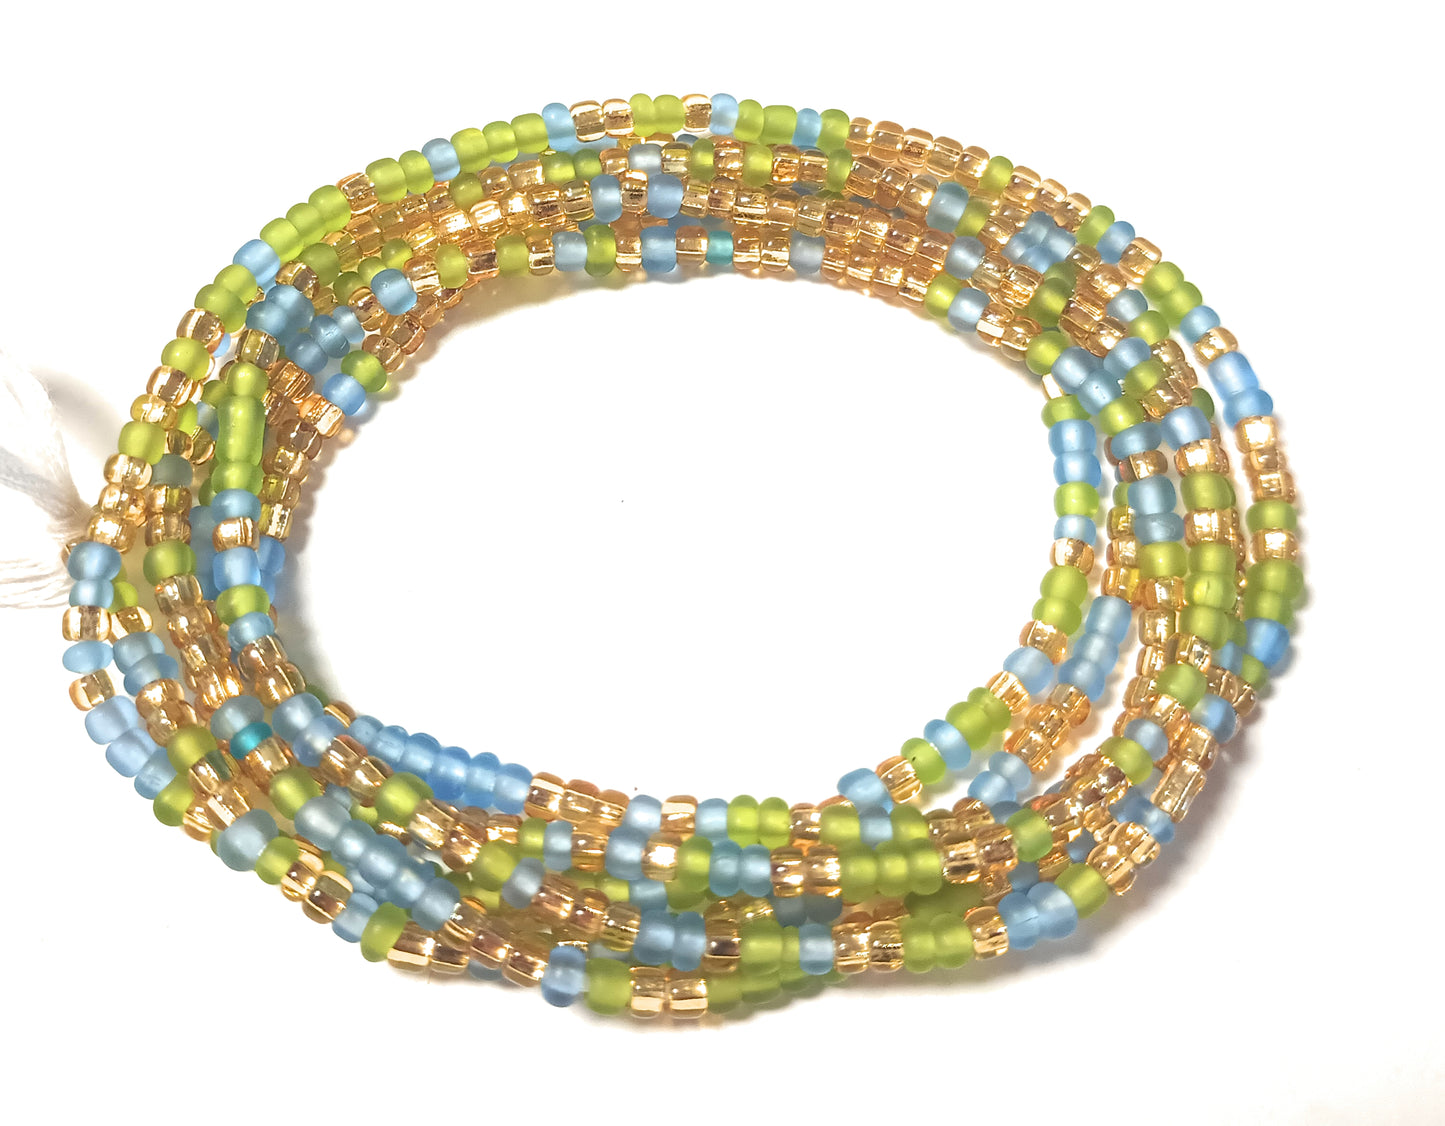 Multicolor Beads, Variety of Colors with Gold Accent Beads